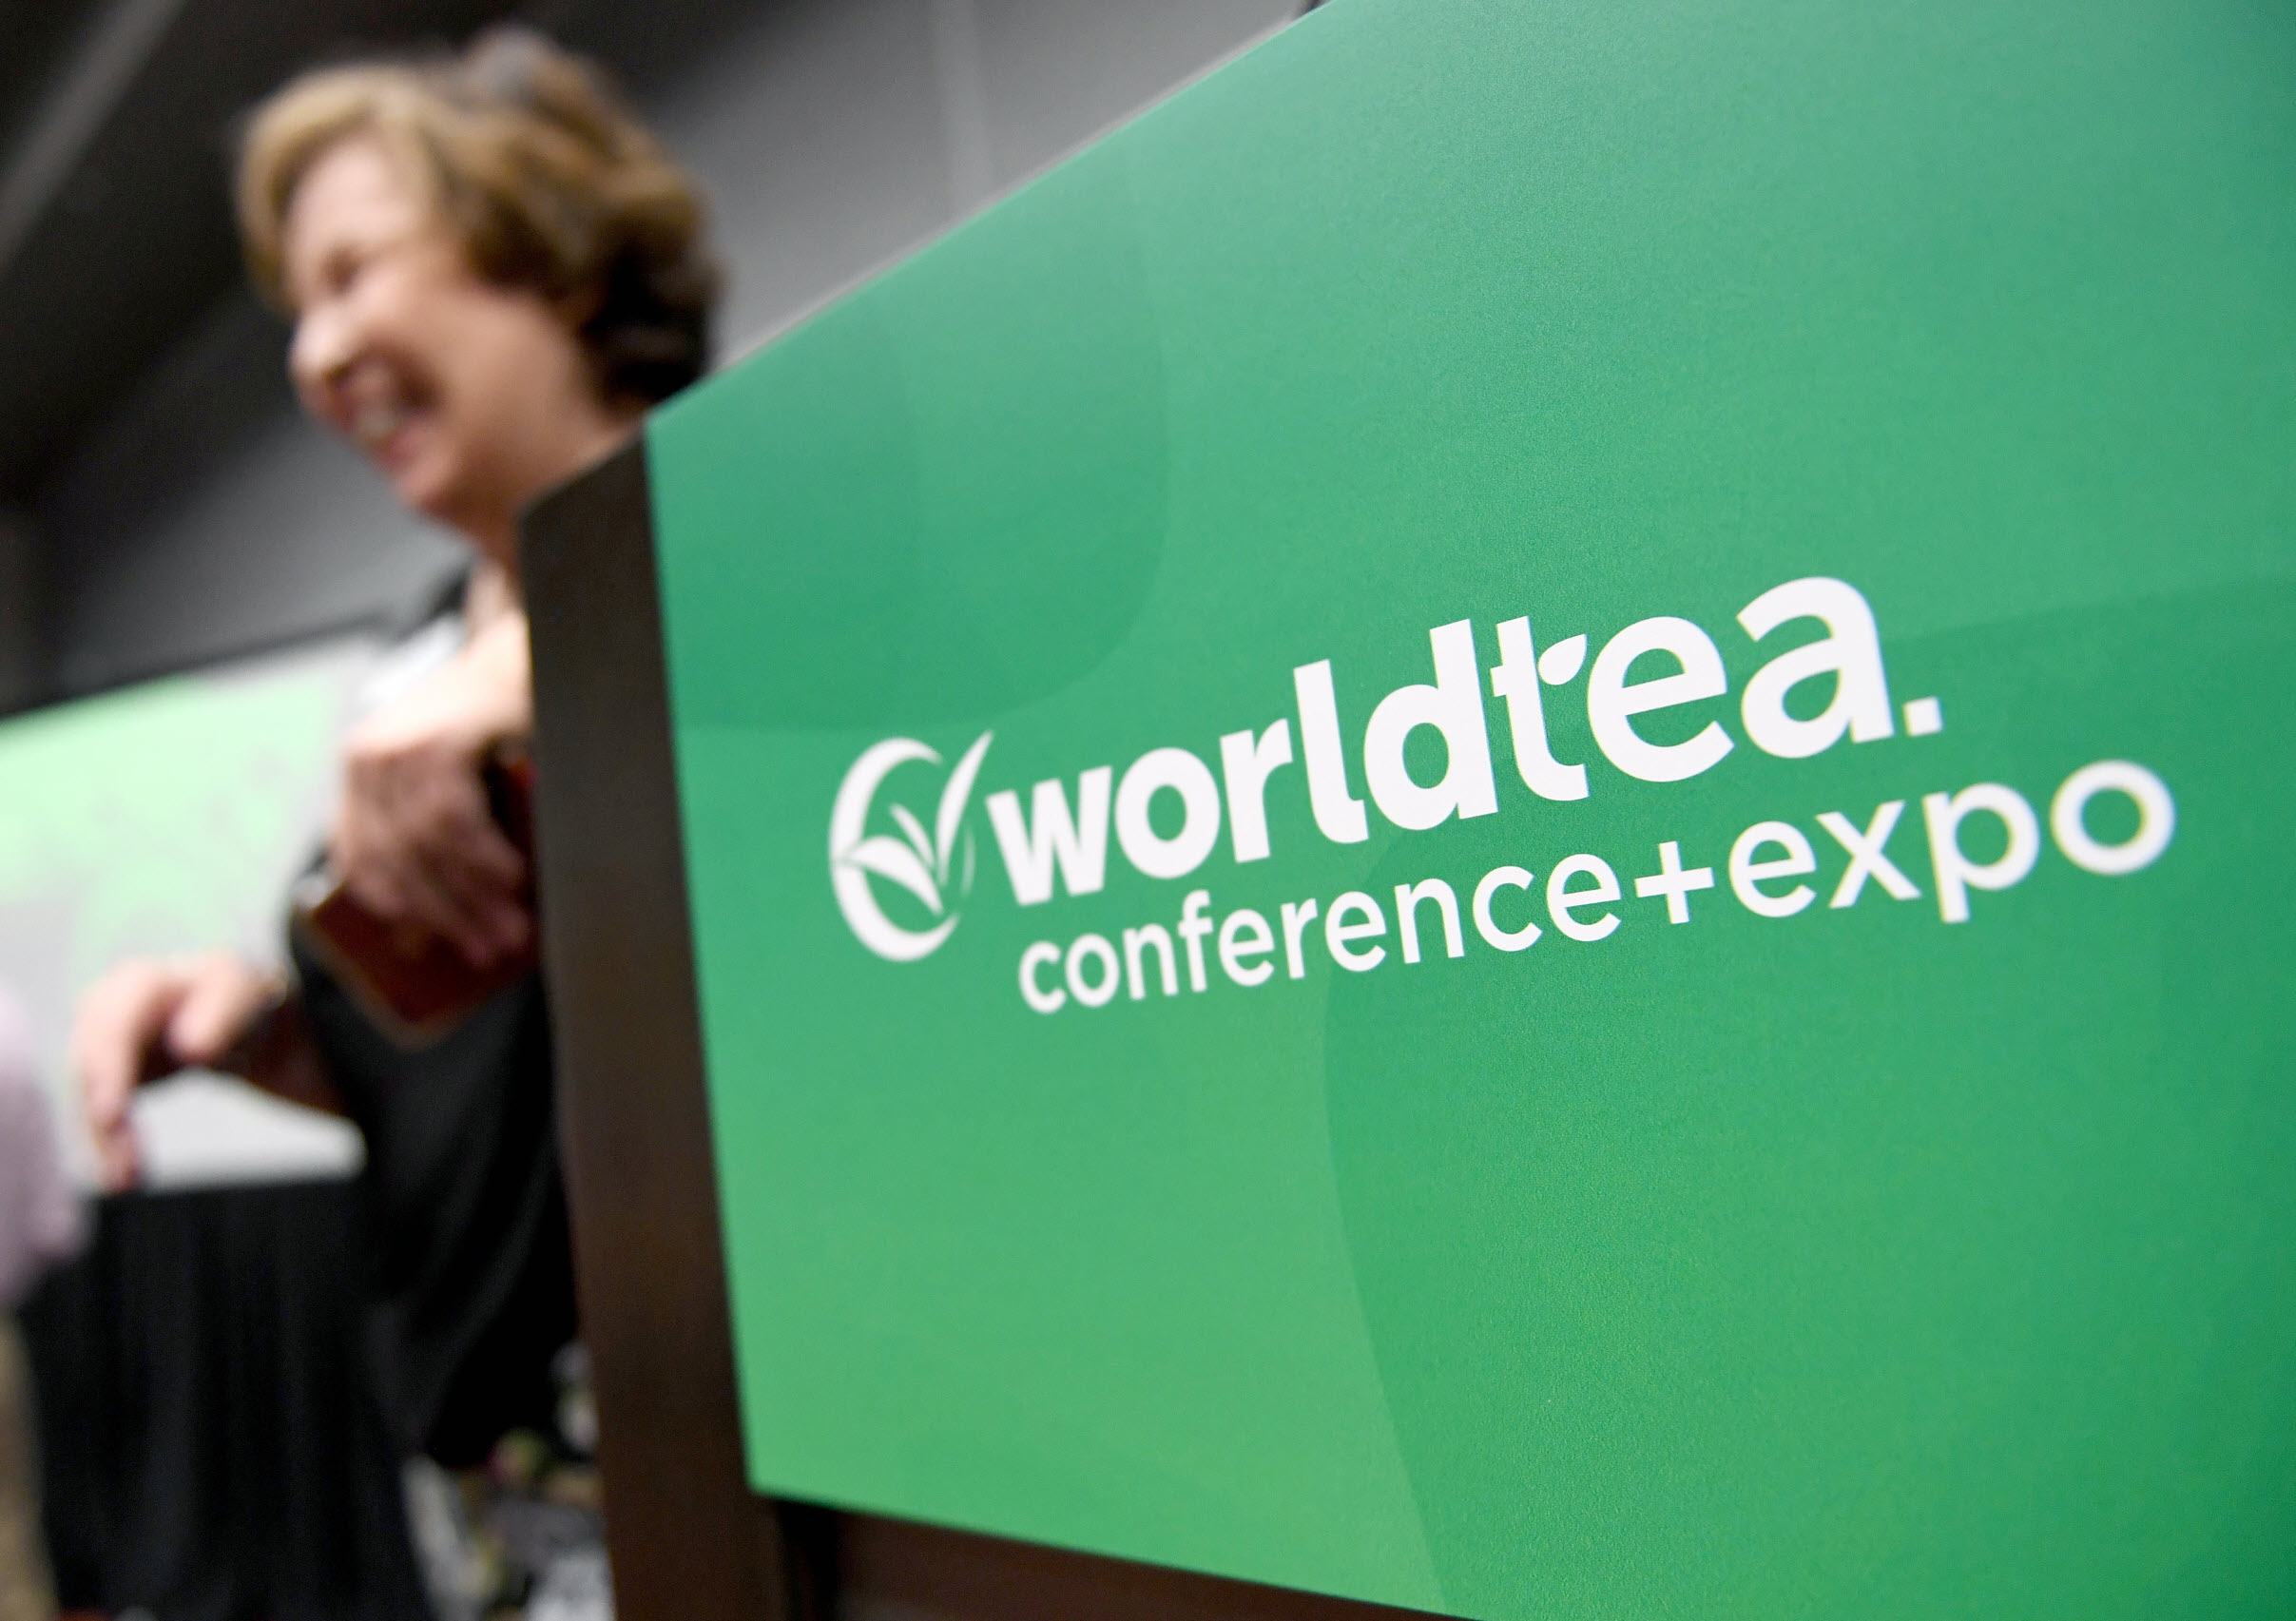 World Tea Conference and Expo 2021 2022